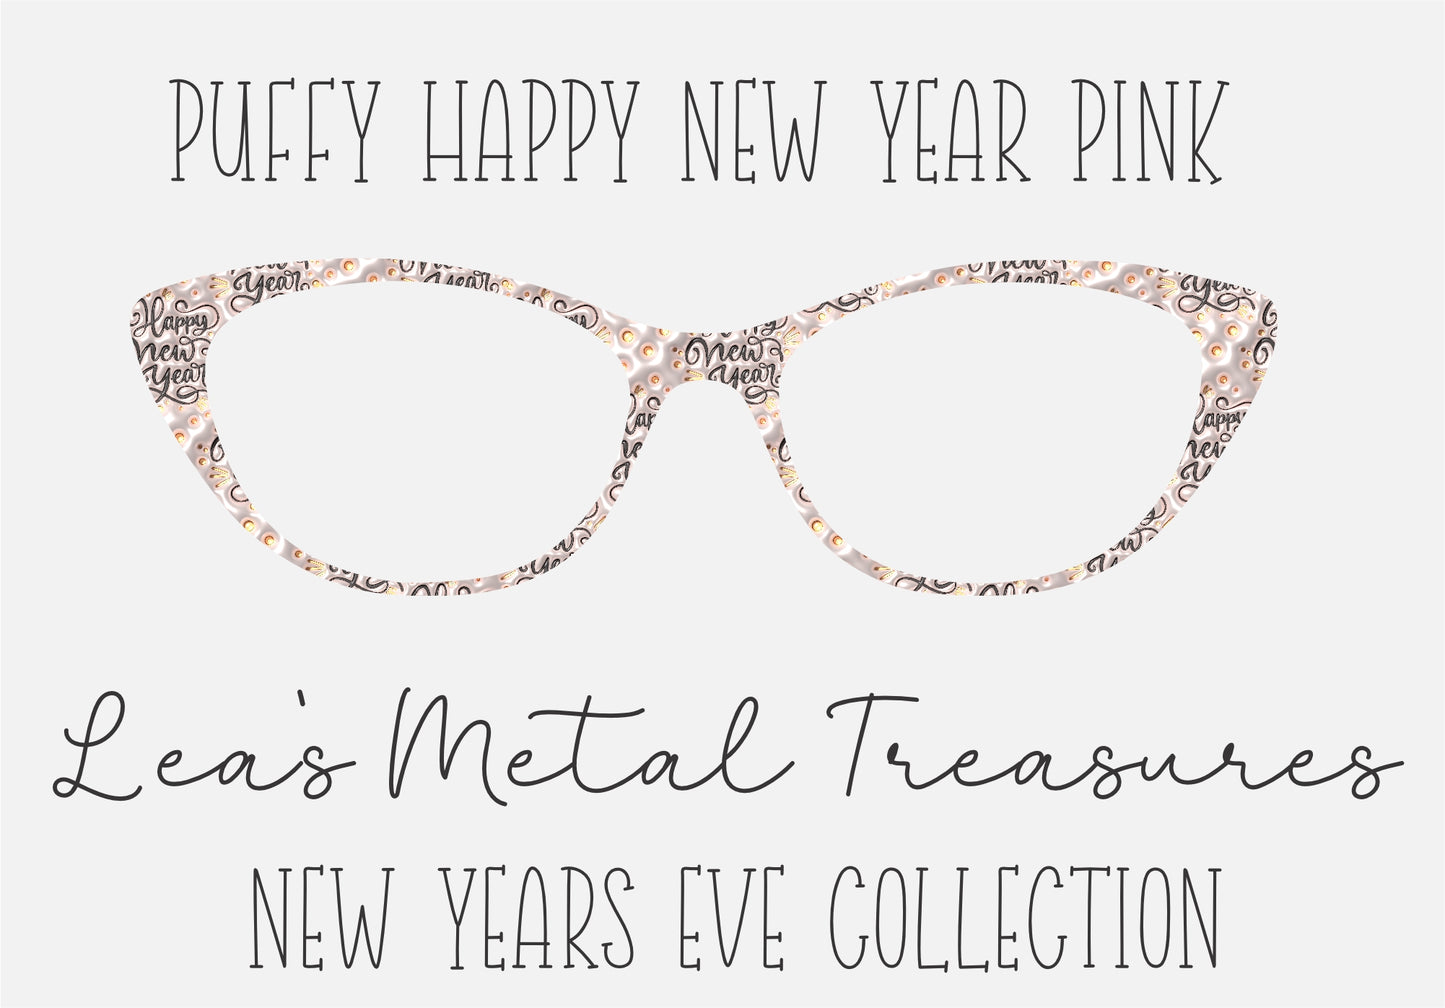 PUFFY HAPPY NEW YEAR PINK Eyewear Frame Toppers COMES WITH MAGNETS